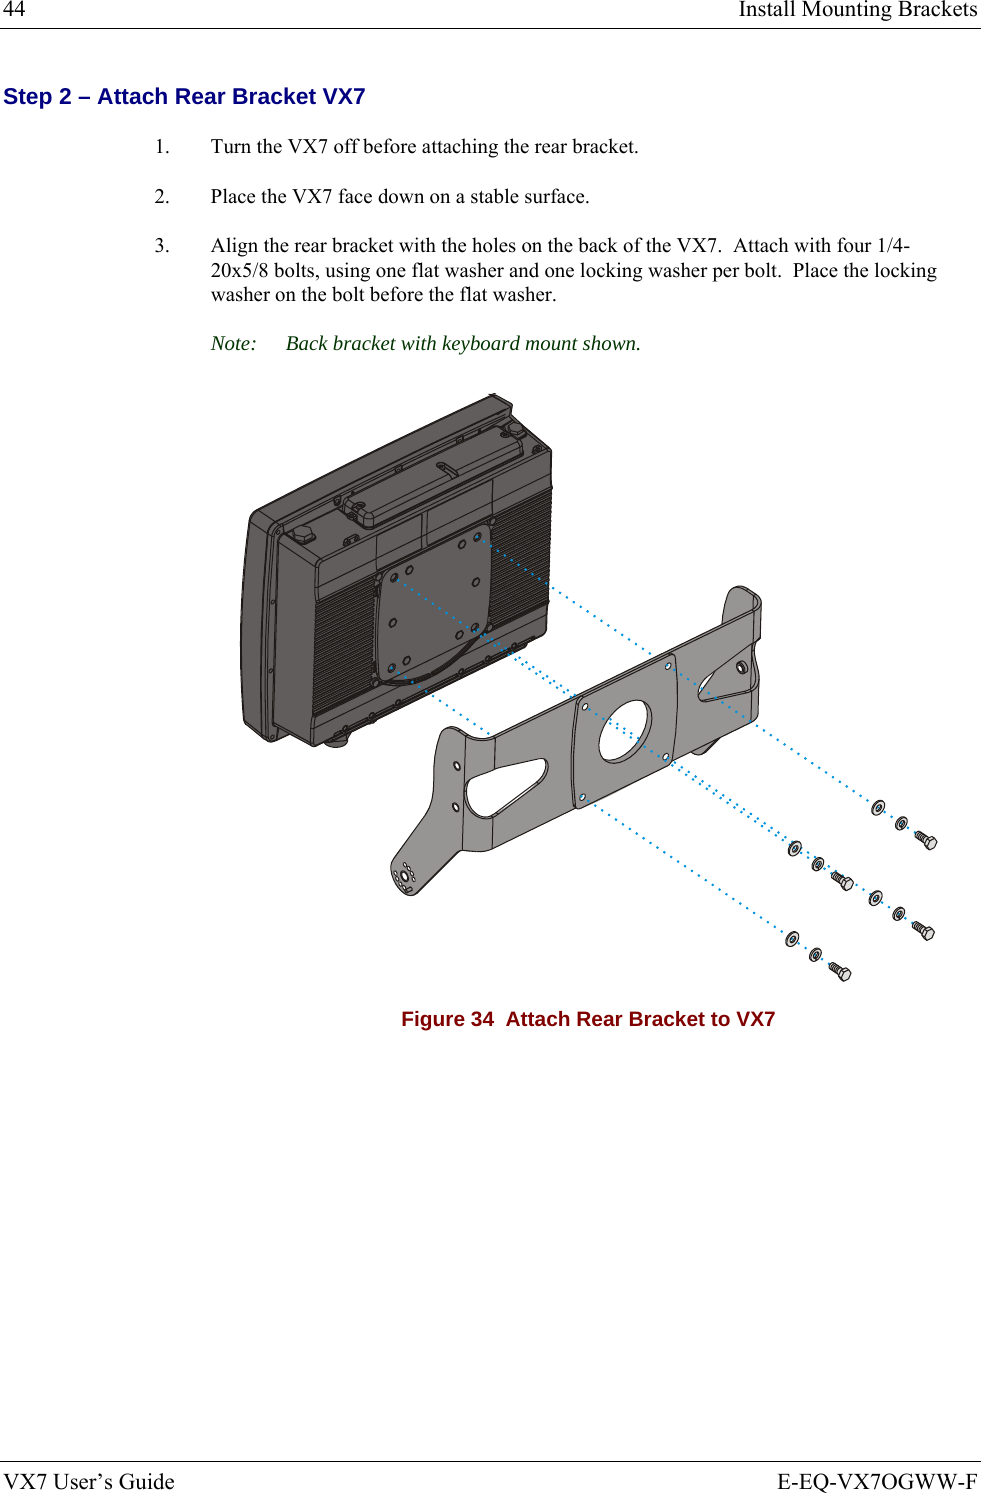 44  Install Mounting Brackets VX7 User’s Guide  E-EQ-VX7OGWW-F Step 2 – Attach Rear Bracket VX7 1.  Turn the VX7 off before attaching the rear bracket. 2.  Place the VX7 face down on a stable surface. 3.  Align the rear bracket with the holes on the back of the VX7.  Attach with four 1/4-20x5/8 bolts, using one flat washer and one locking washer per bolt.  Place the locking washer on the bolt before the flat washer.   Note:  Back bracket with keyboard mount shown.  Figure 34  Attach Rear Bracket to VX7 